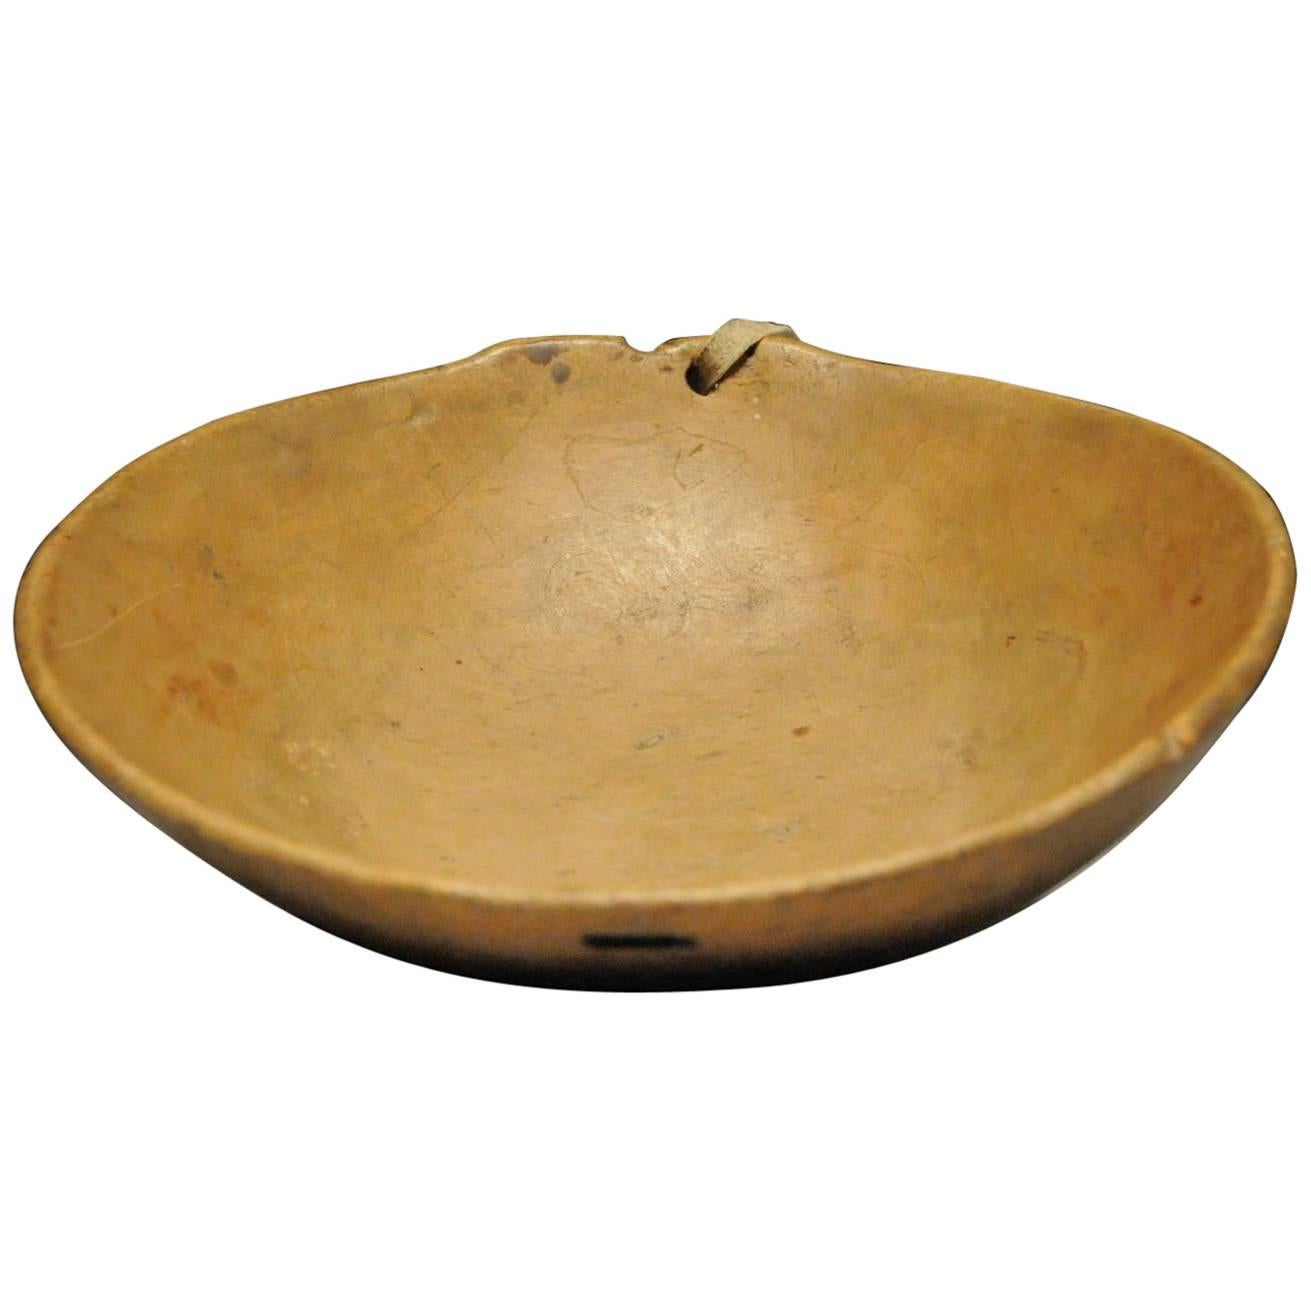 19th Century Native American Bowl with Raised Crest